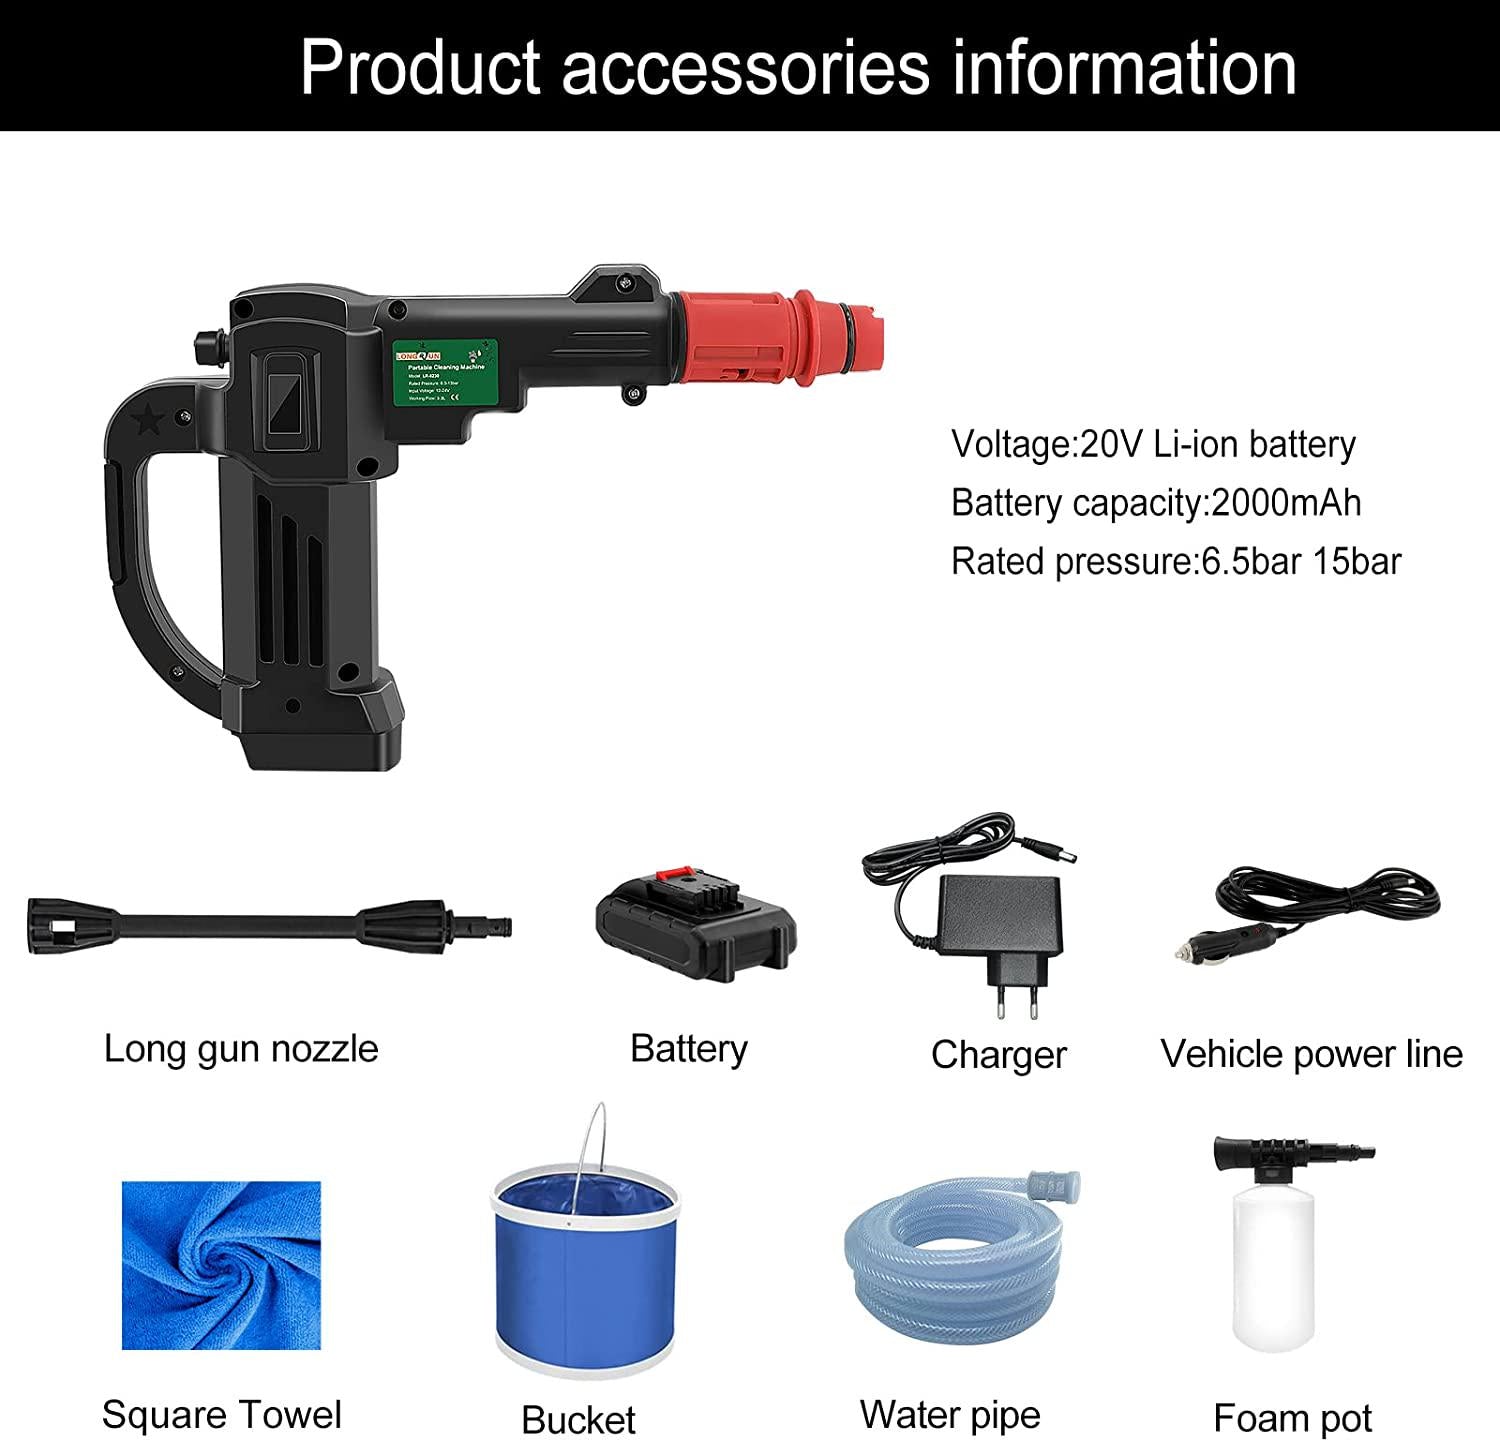 Longrun, LONGRUN Cordless Pressure Washer, 20V 15Bar Portable Power Washer, 2.0Ah Battery Pressure Cleaner Jet Washer with Nozzle, Compact Handheld Pressure Water Sprayer for Patio Cleaning Car Washing